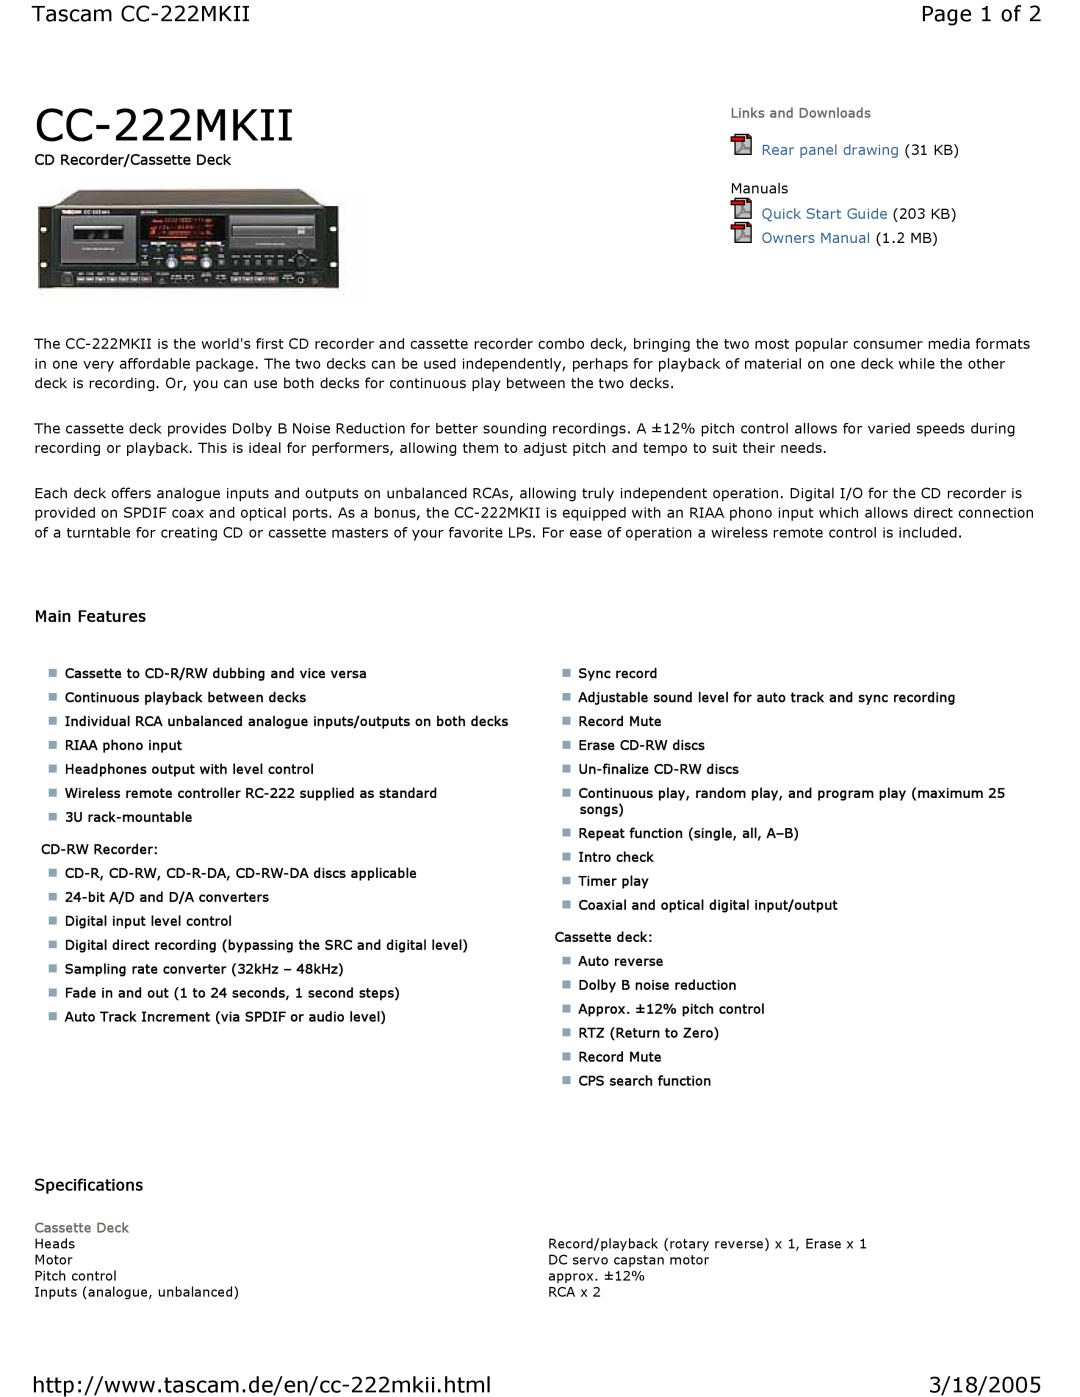 Tascam specifications Tascam CC-222MKII, 3/18/2005, Page 1 of, Main Features, Specifications, CD Recorder/Cassette Deck 